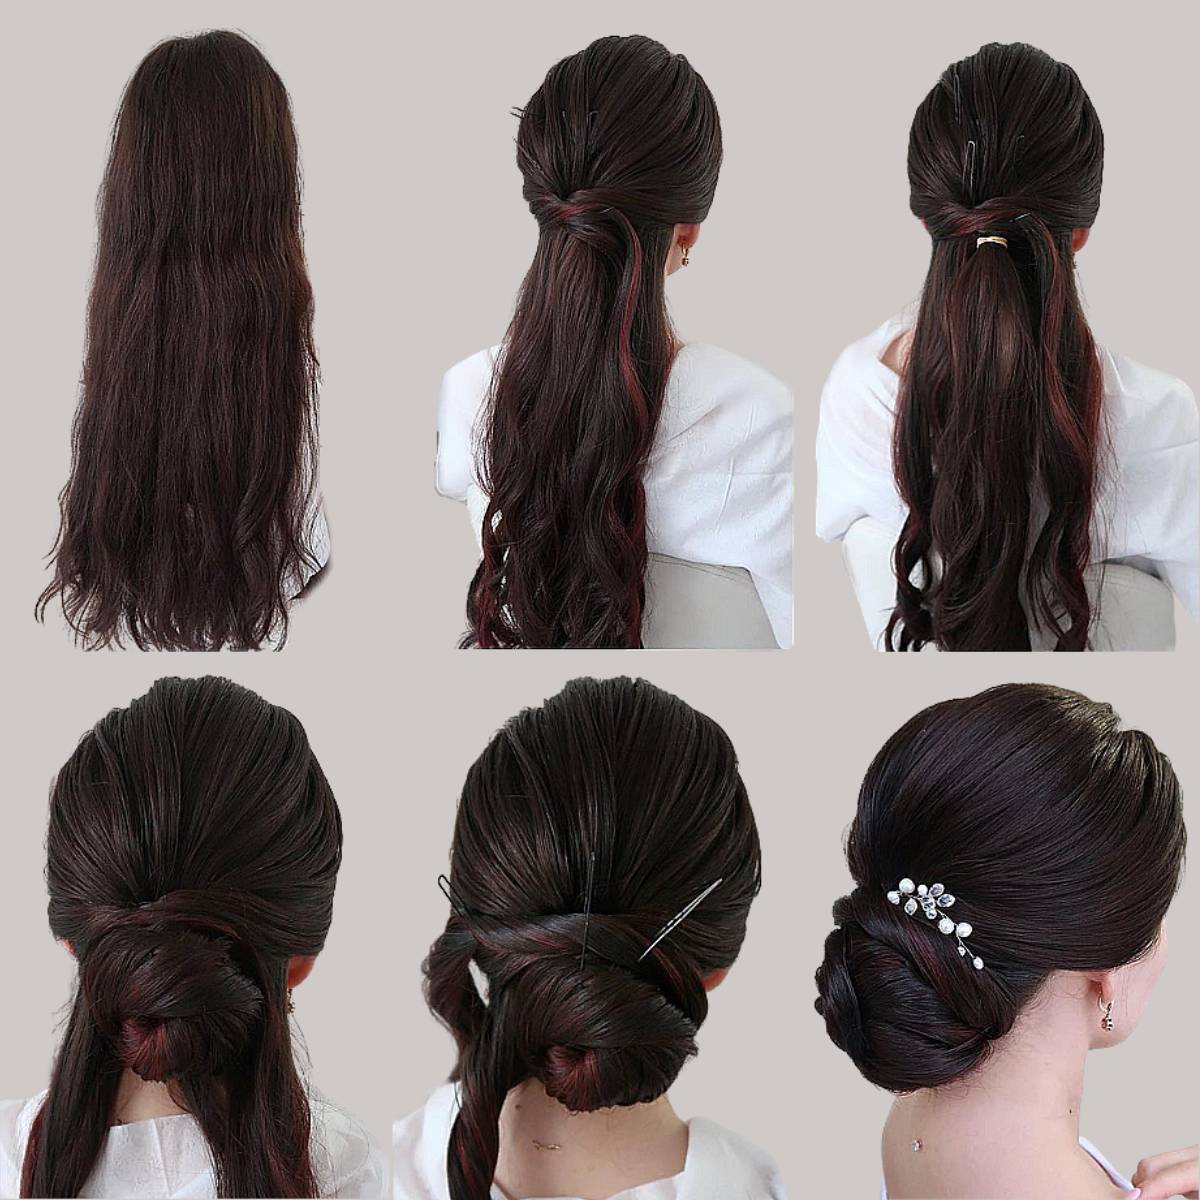 Easy Hairstyles for the Office | House of Inspirations